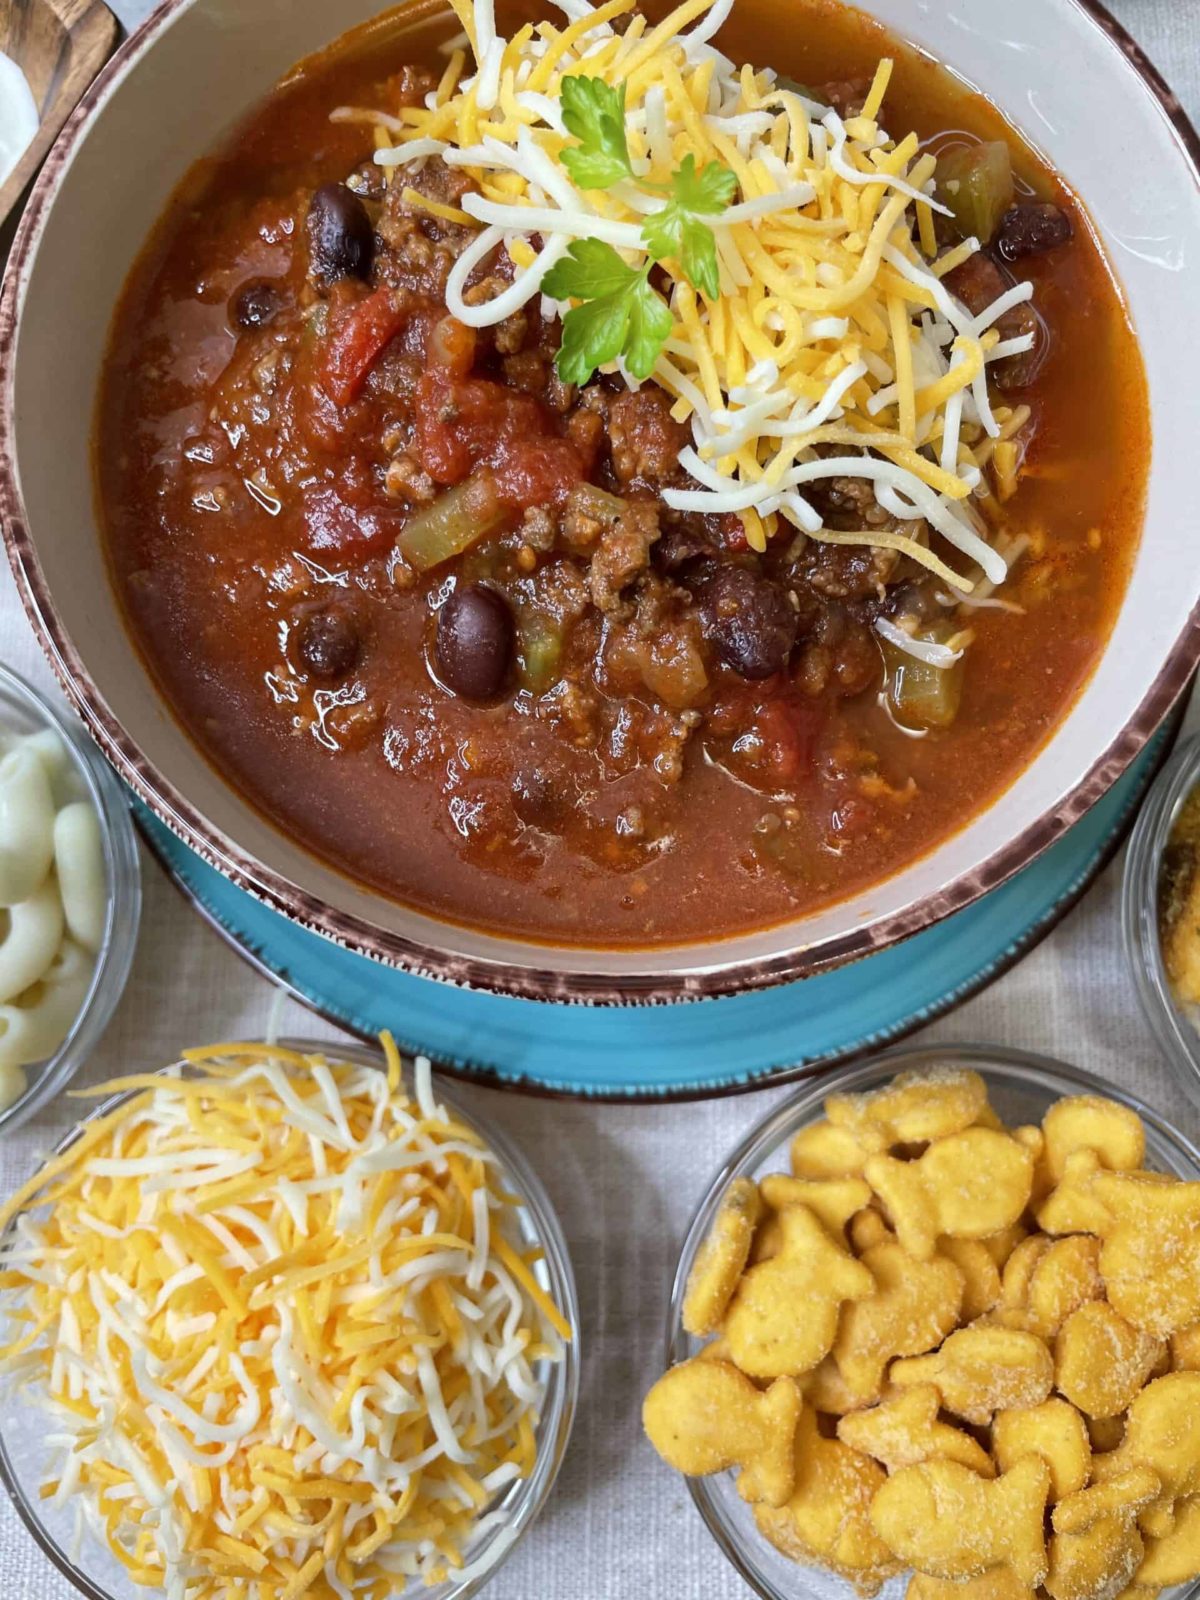 Black Bean Chili with Shredded Cheese, Gold fish, and Cooked Noodles.